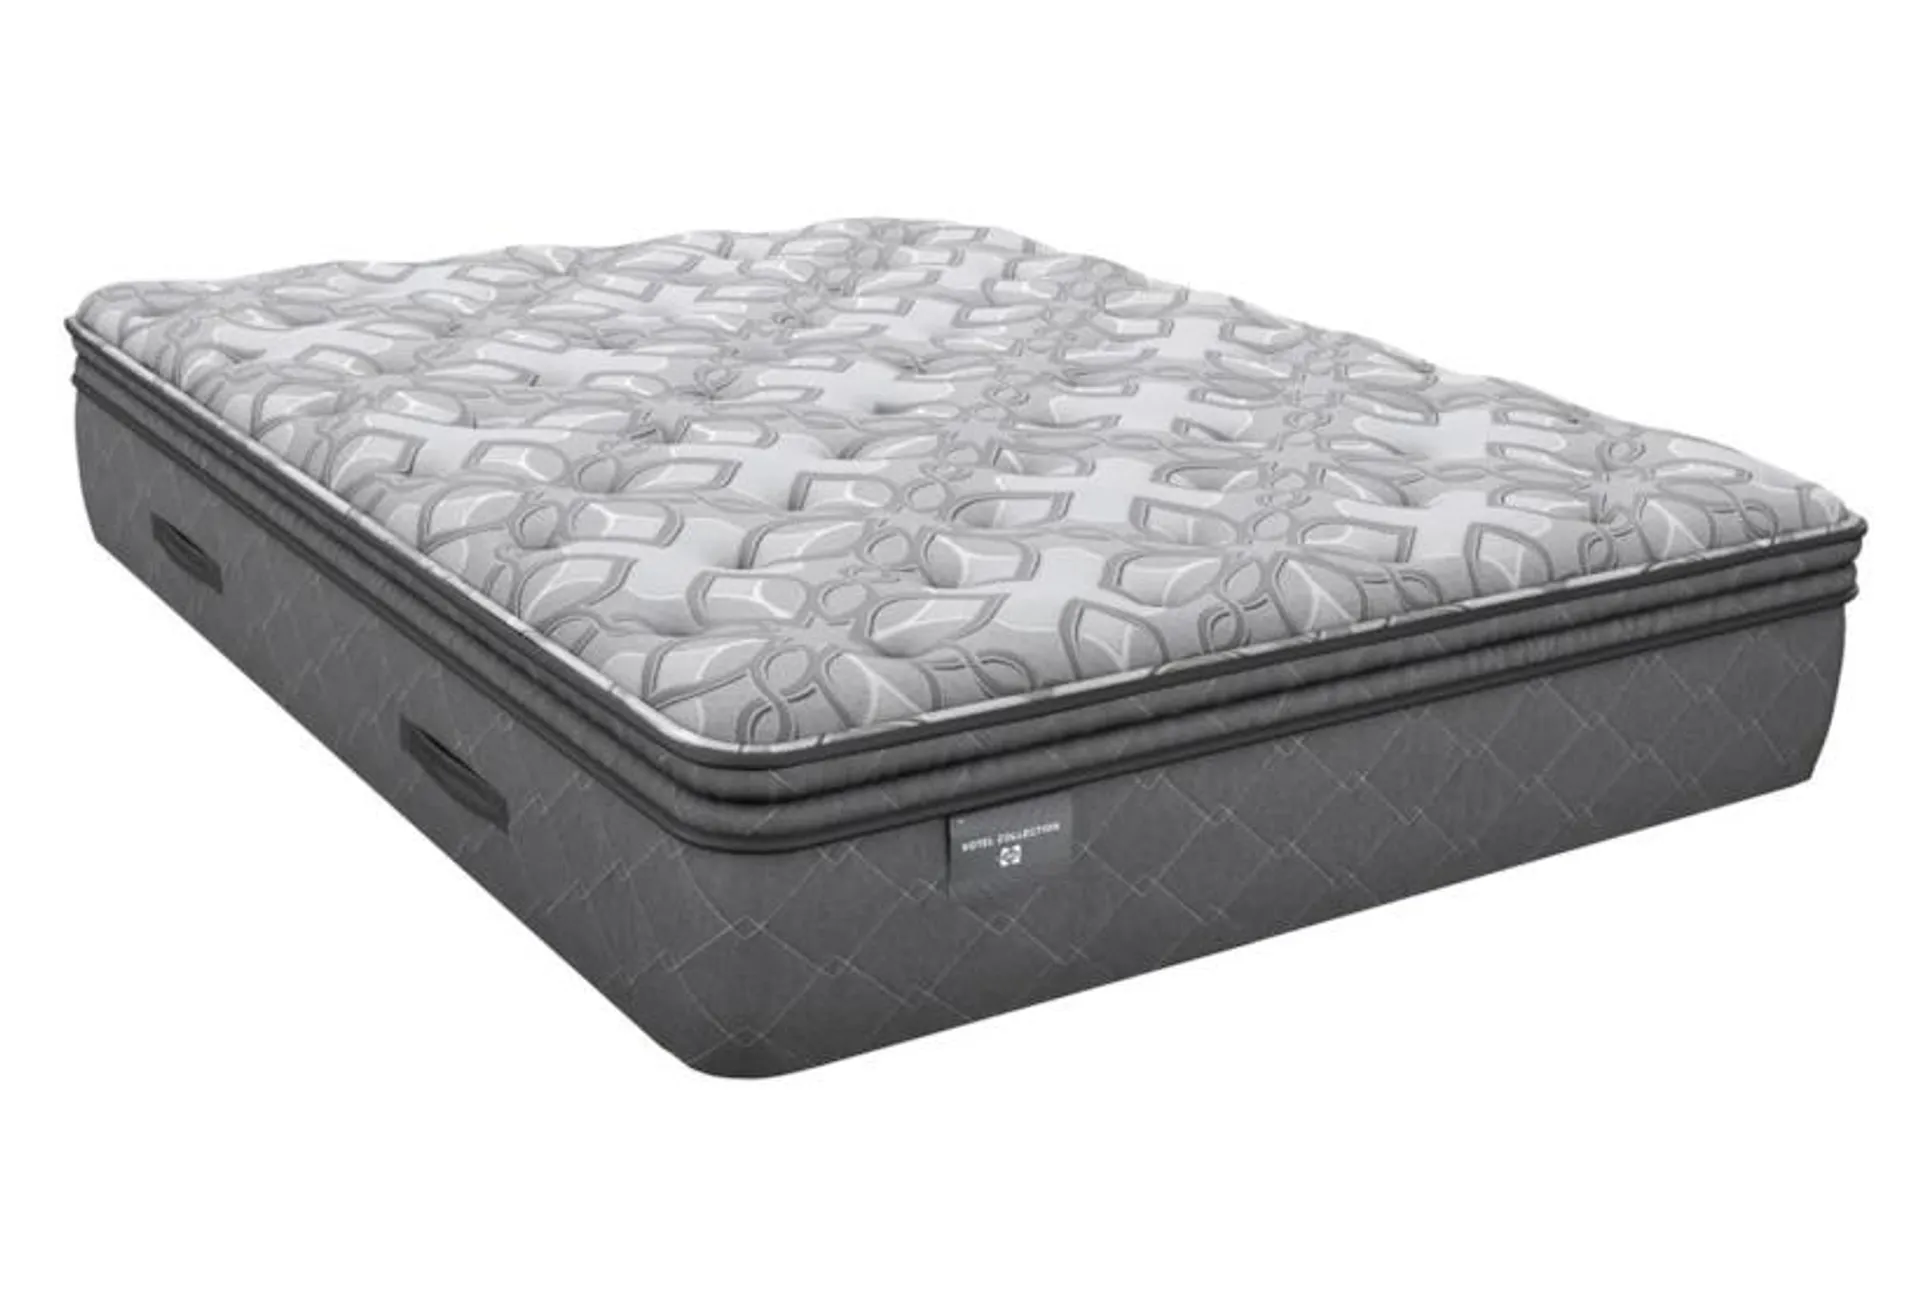 Sealy Hotel Collection Soft Euro Top 13.5" Soft Innerspring Queen Mattress